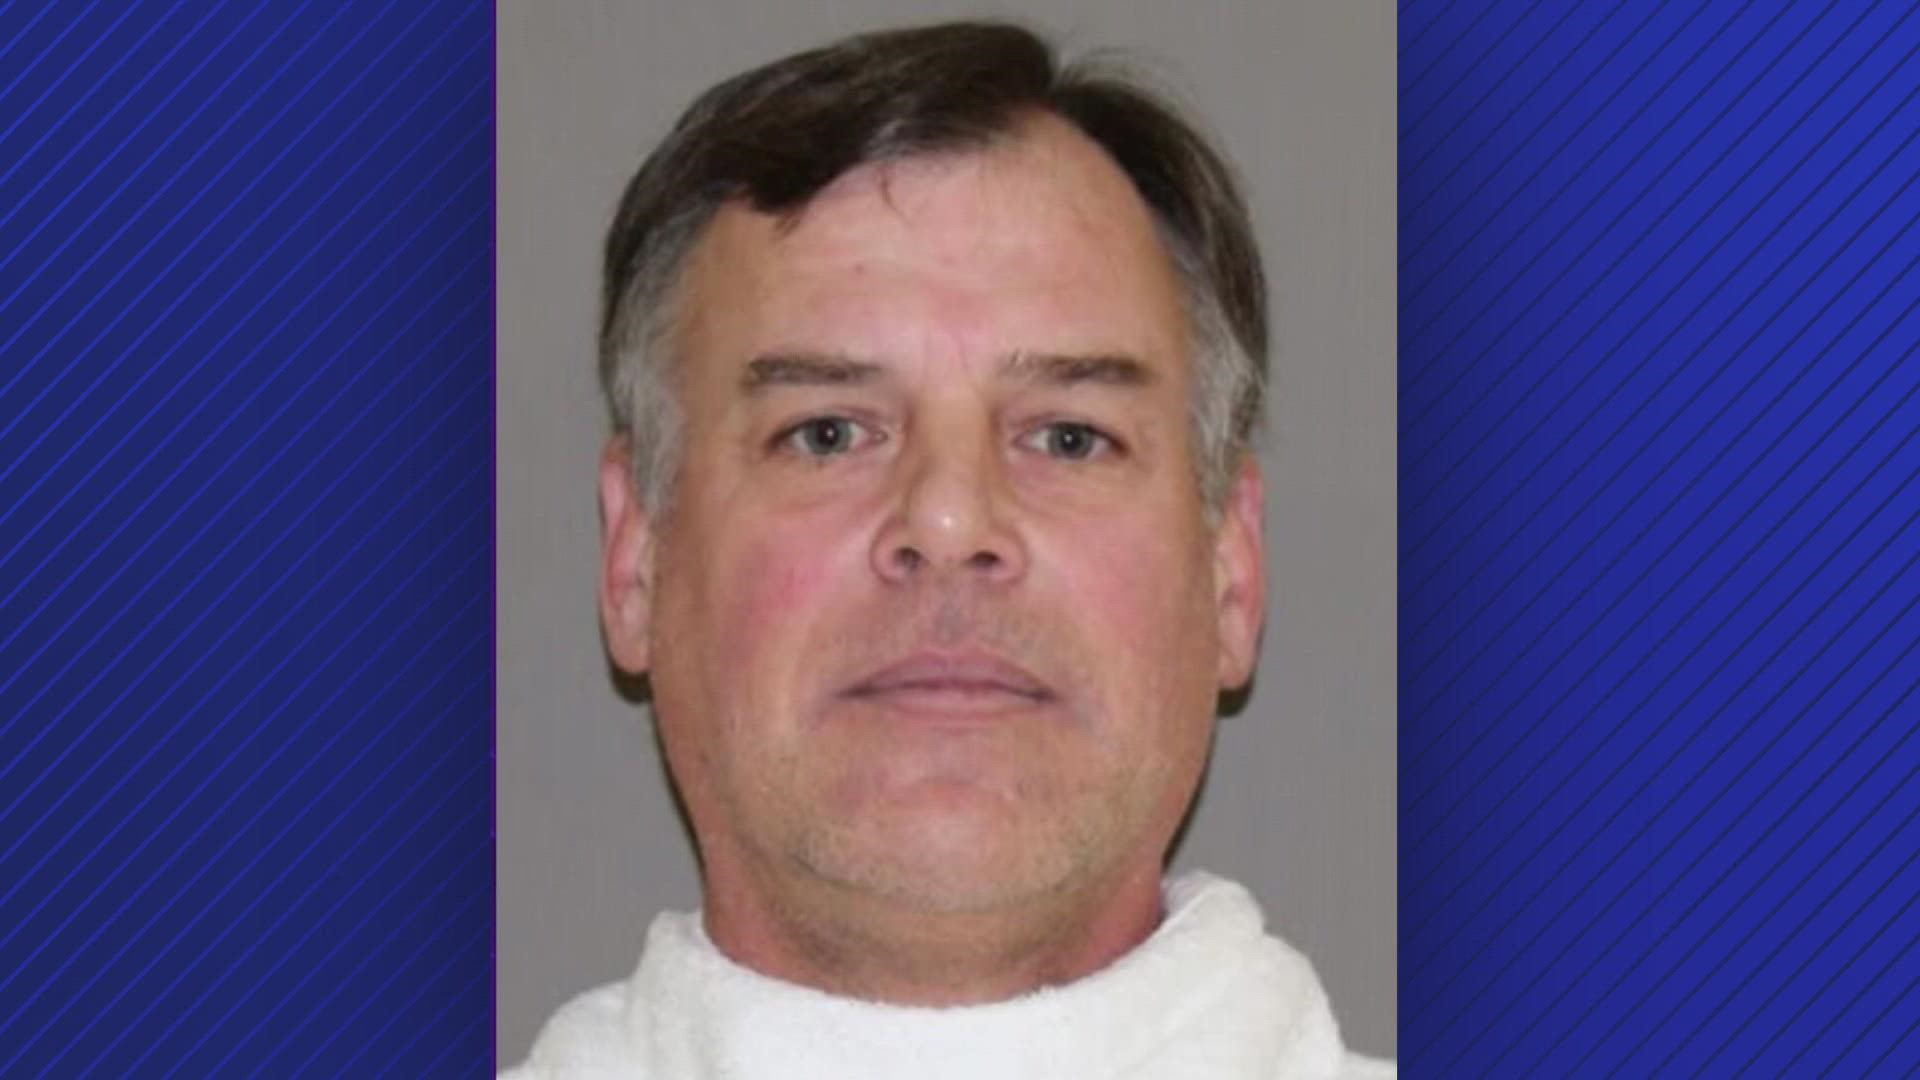 A county judge declared a mistrial last week in the sex abuse case against John Wetteland.